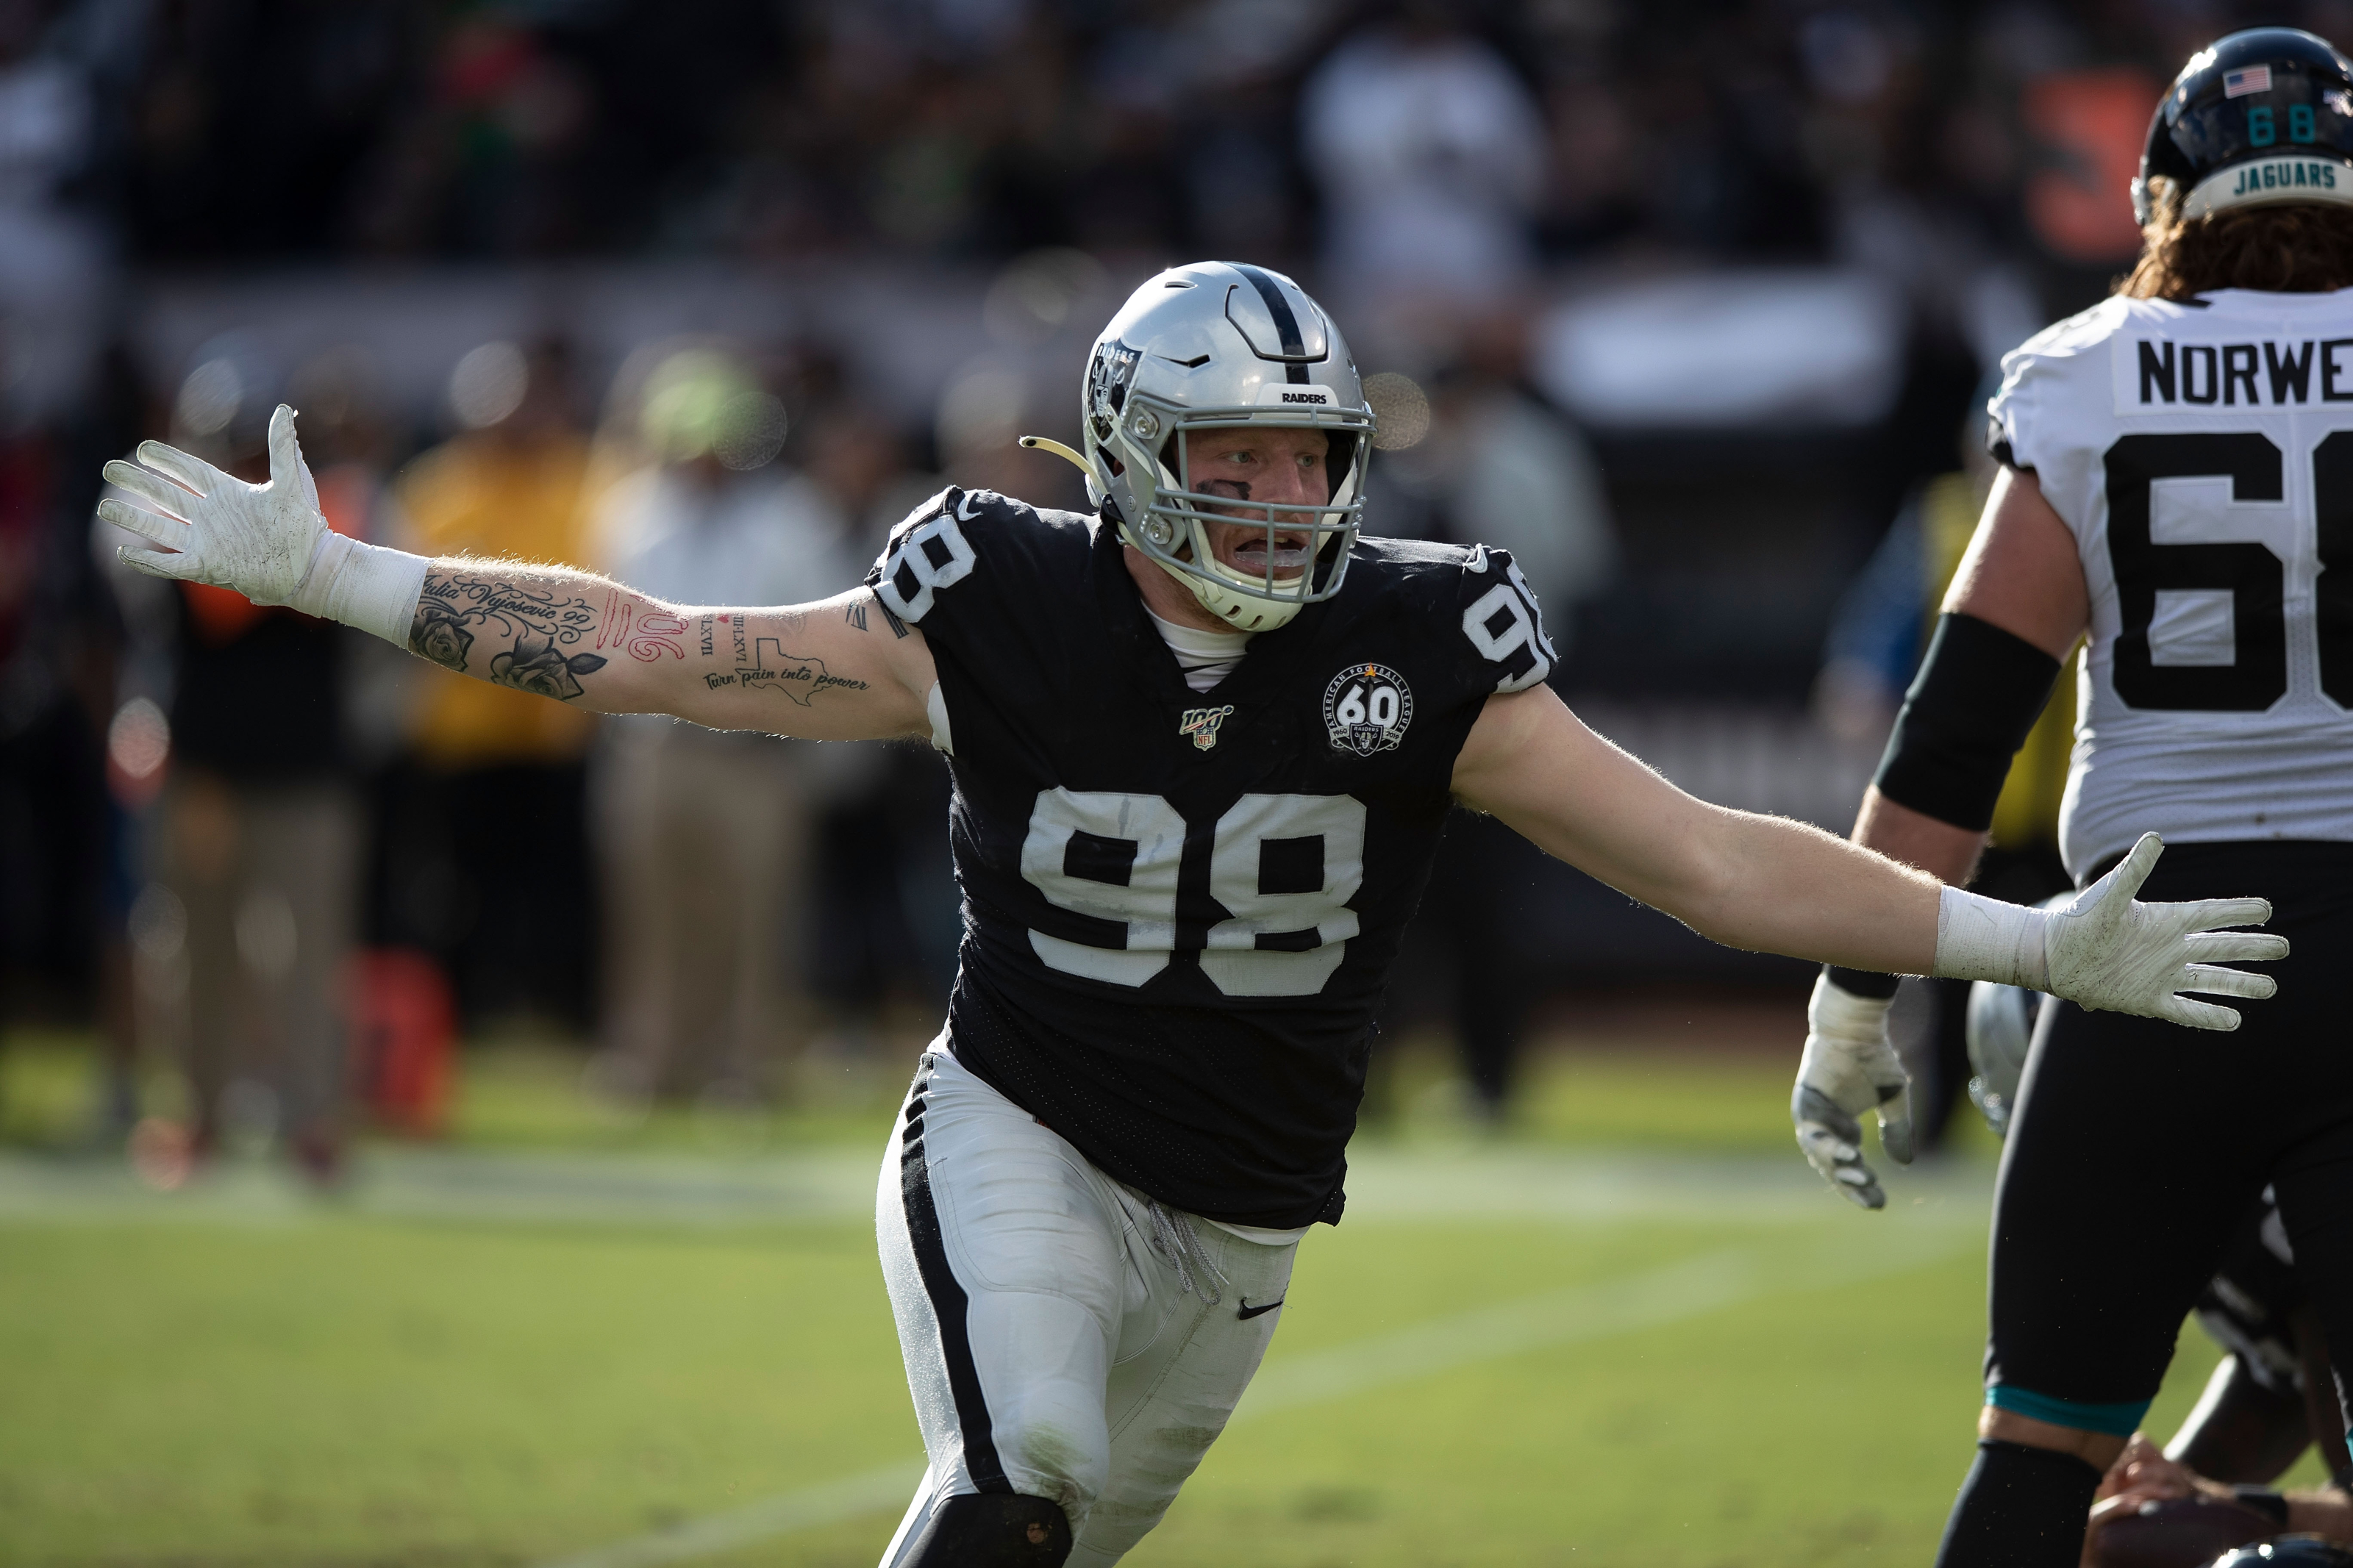 Raiders: Maxx Crosby was the team's most surprising player in 2019